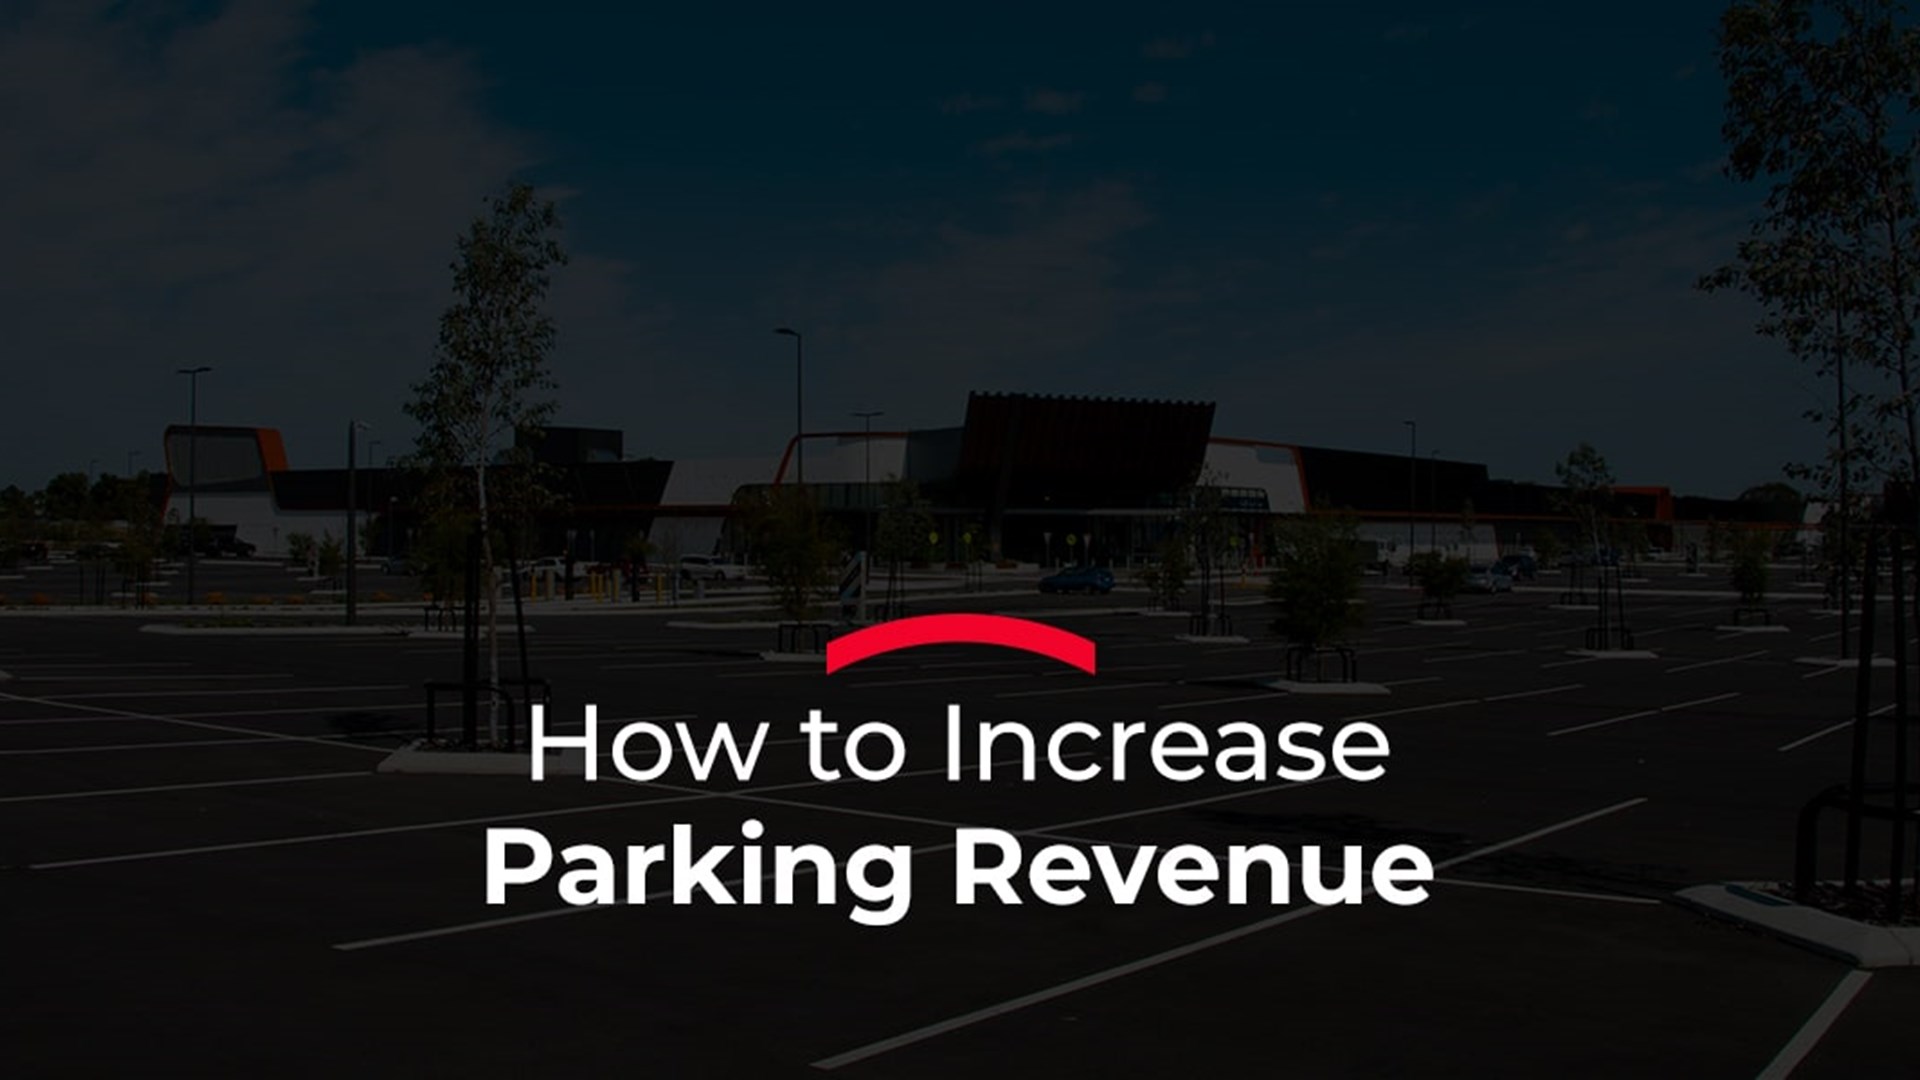 How to Increase Parking Revenue